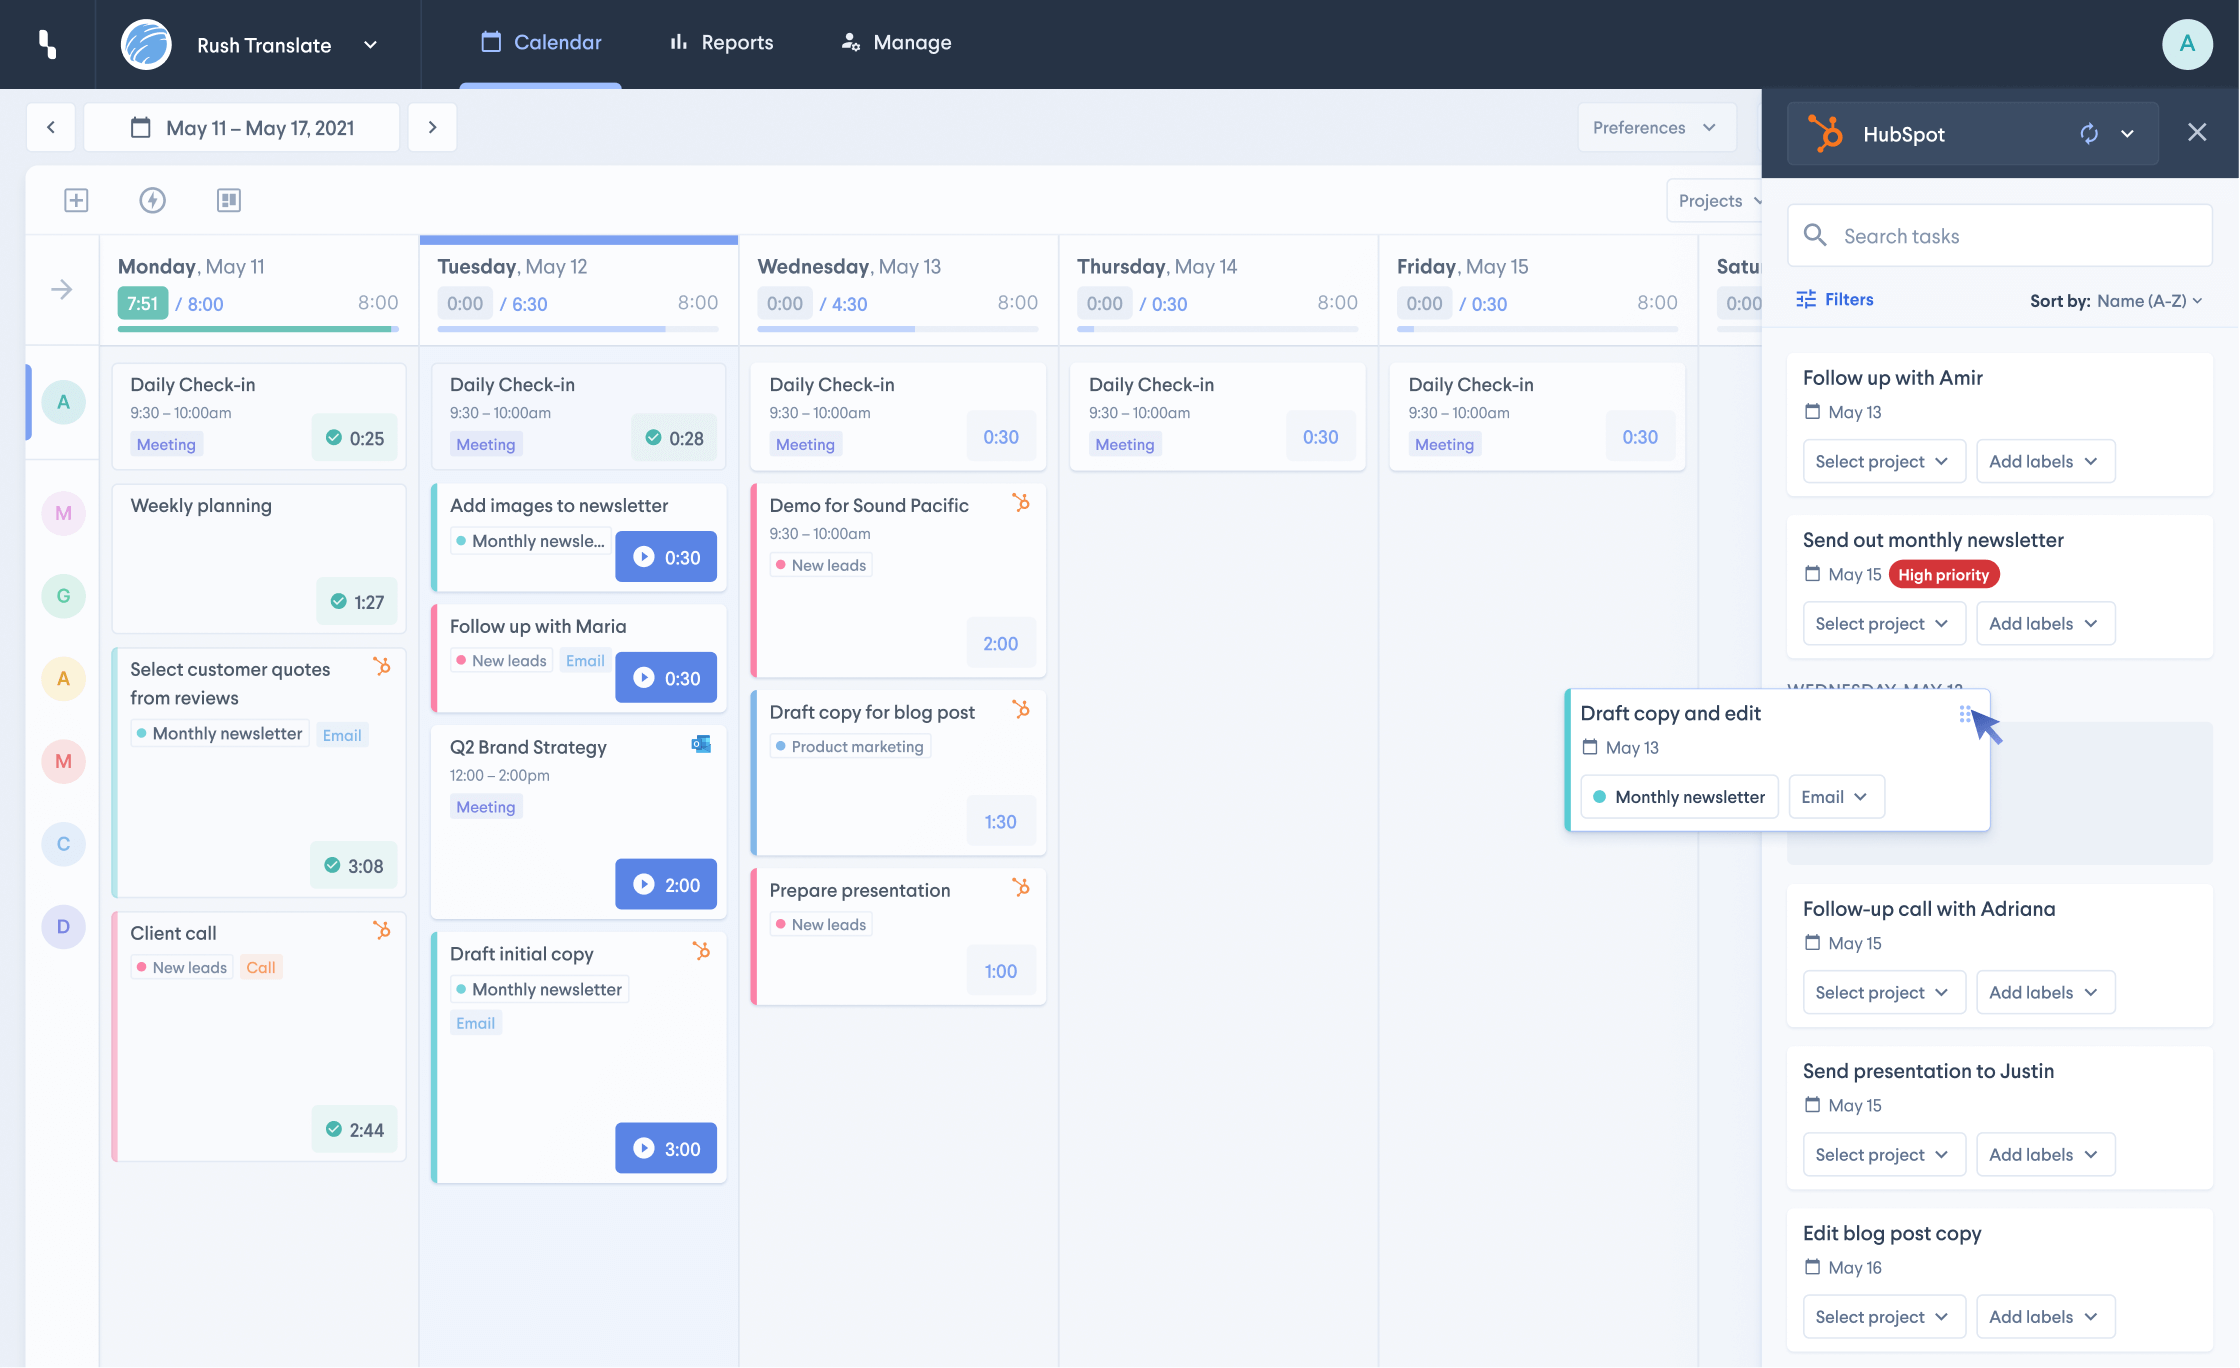 Simple drag and drop interface for connecting HubSpot tasks in HourStack